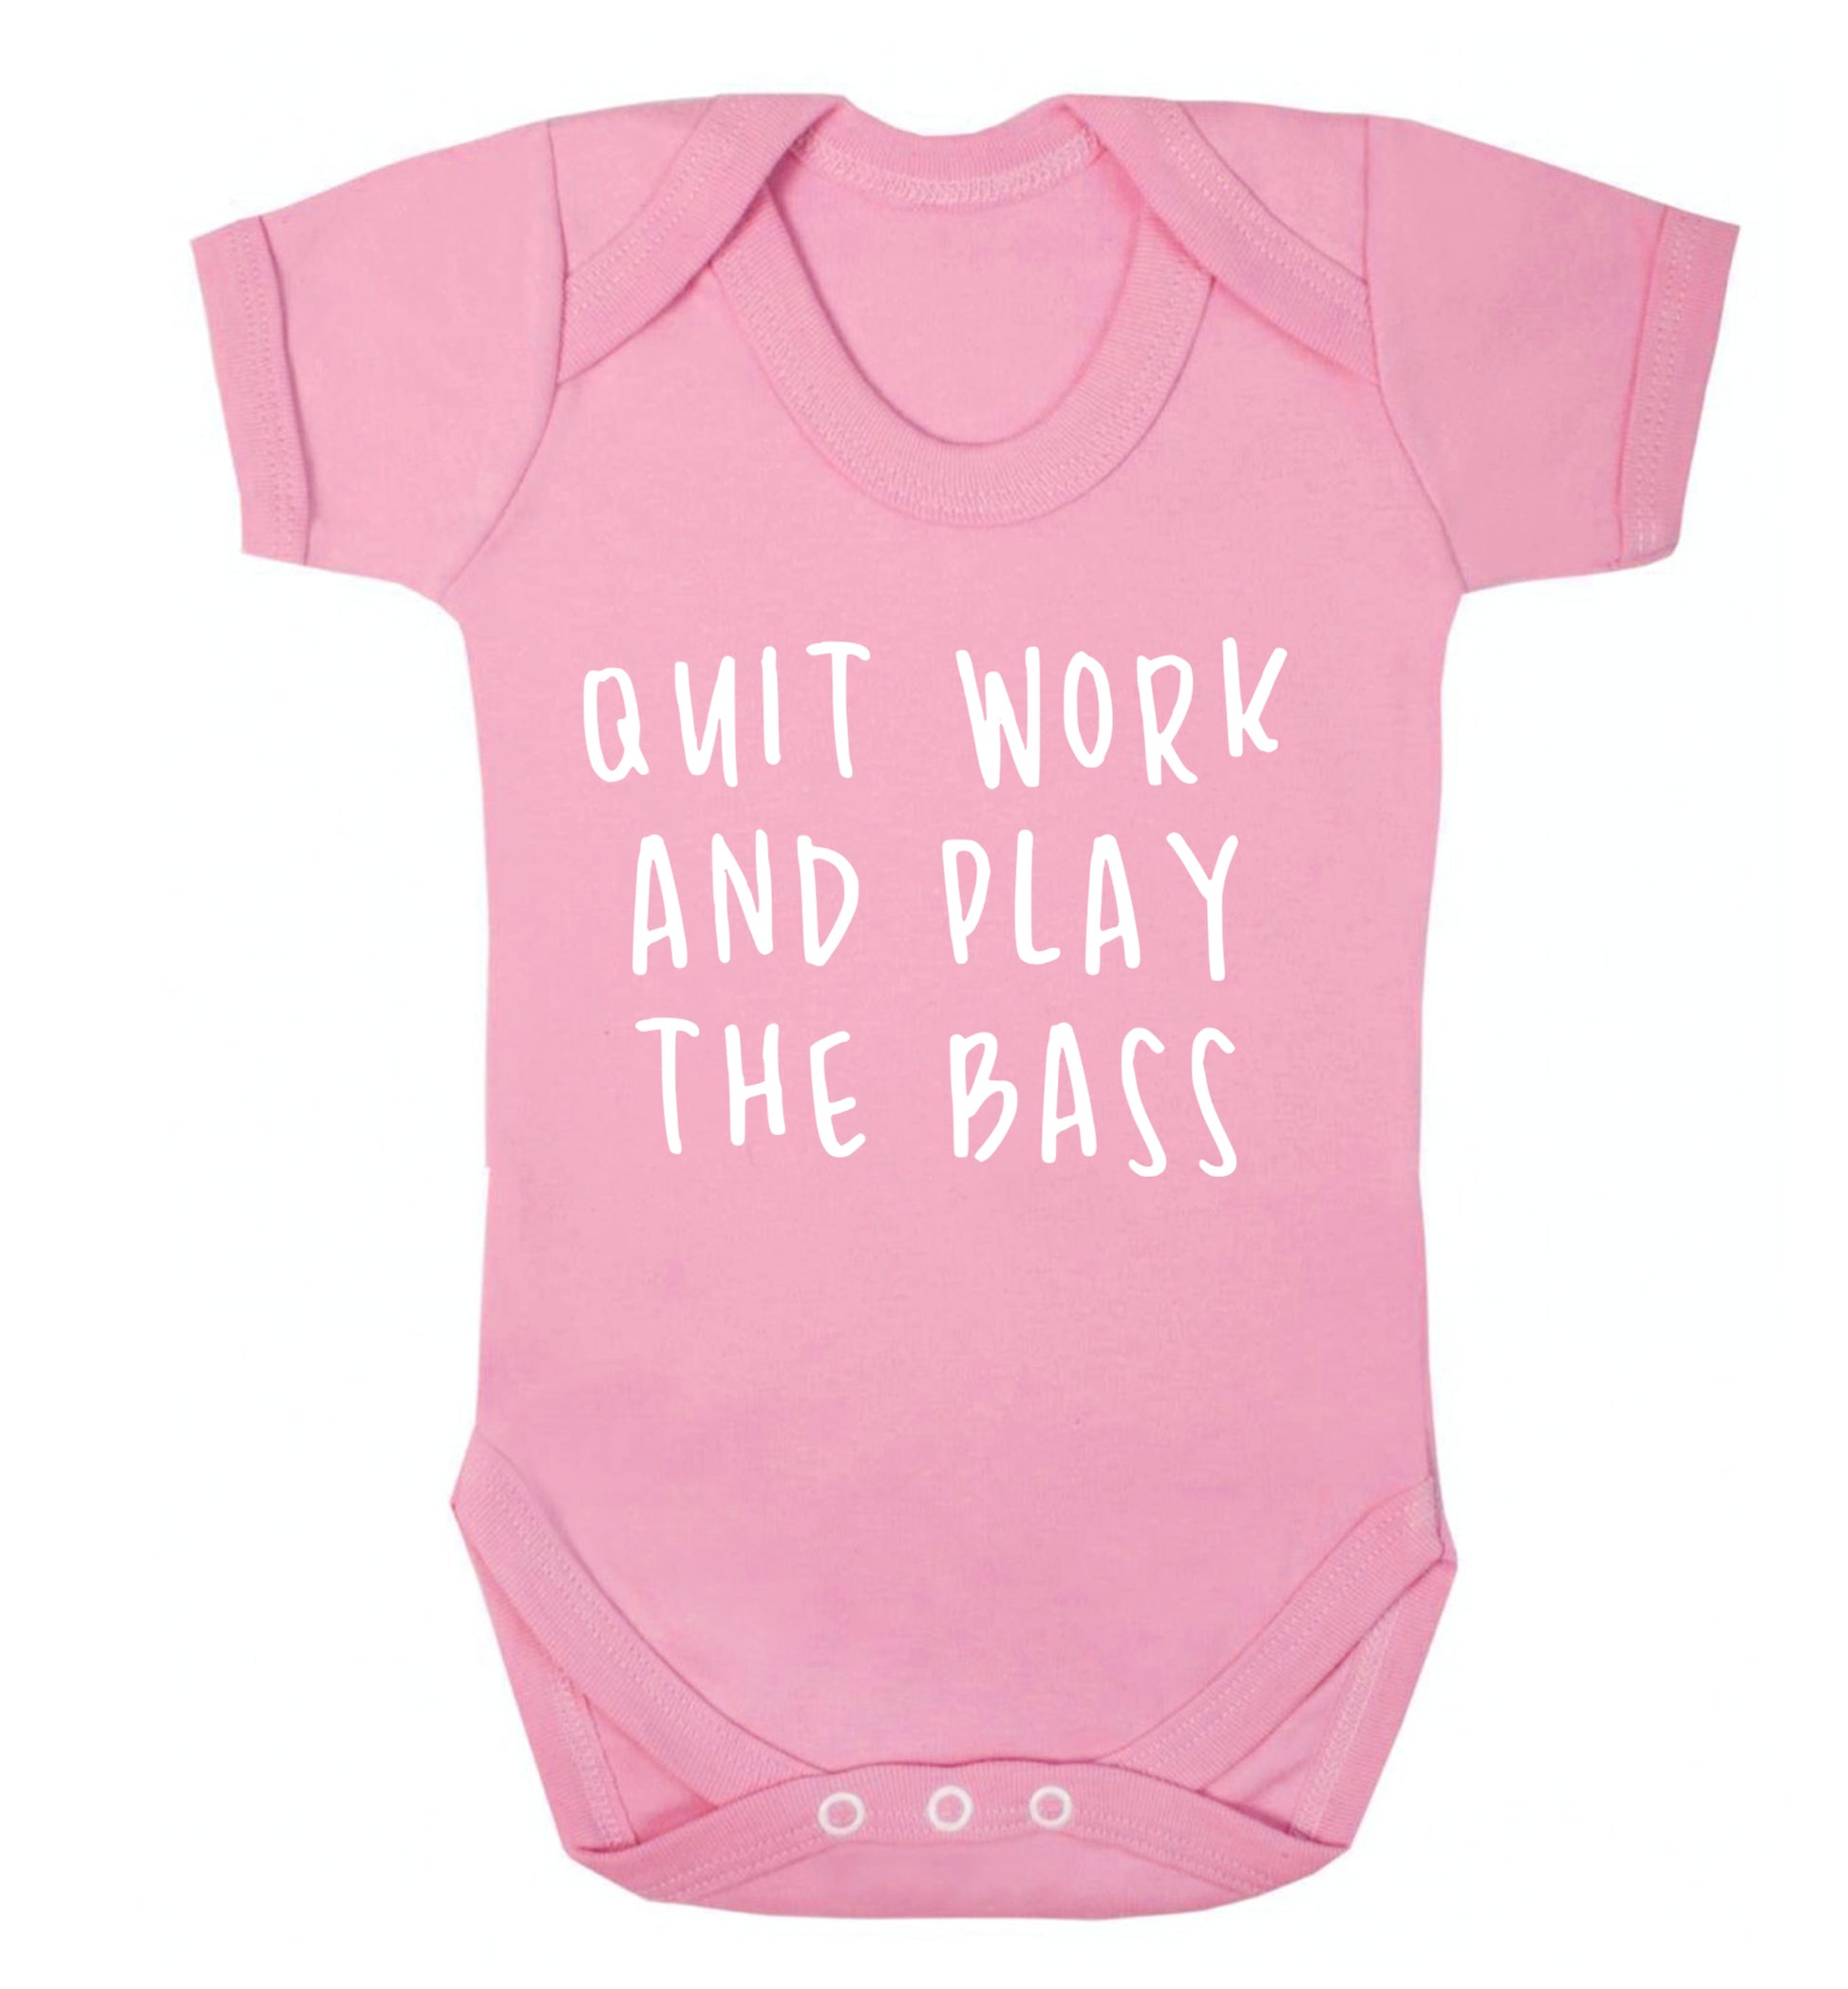 Quit work and play the bass Baby Vest pale pink 18-24 months